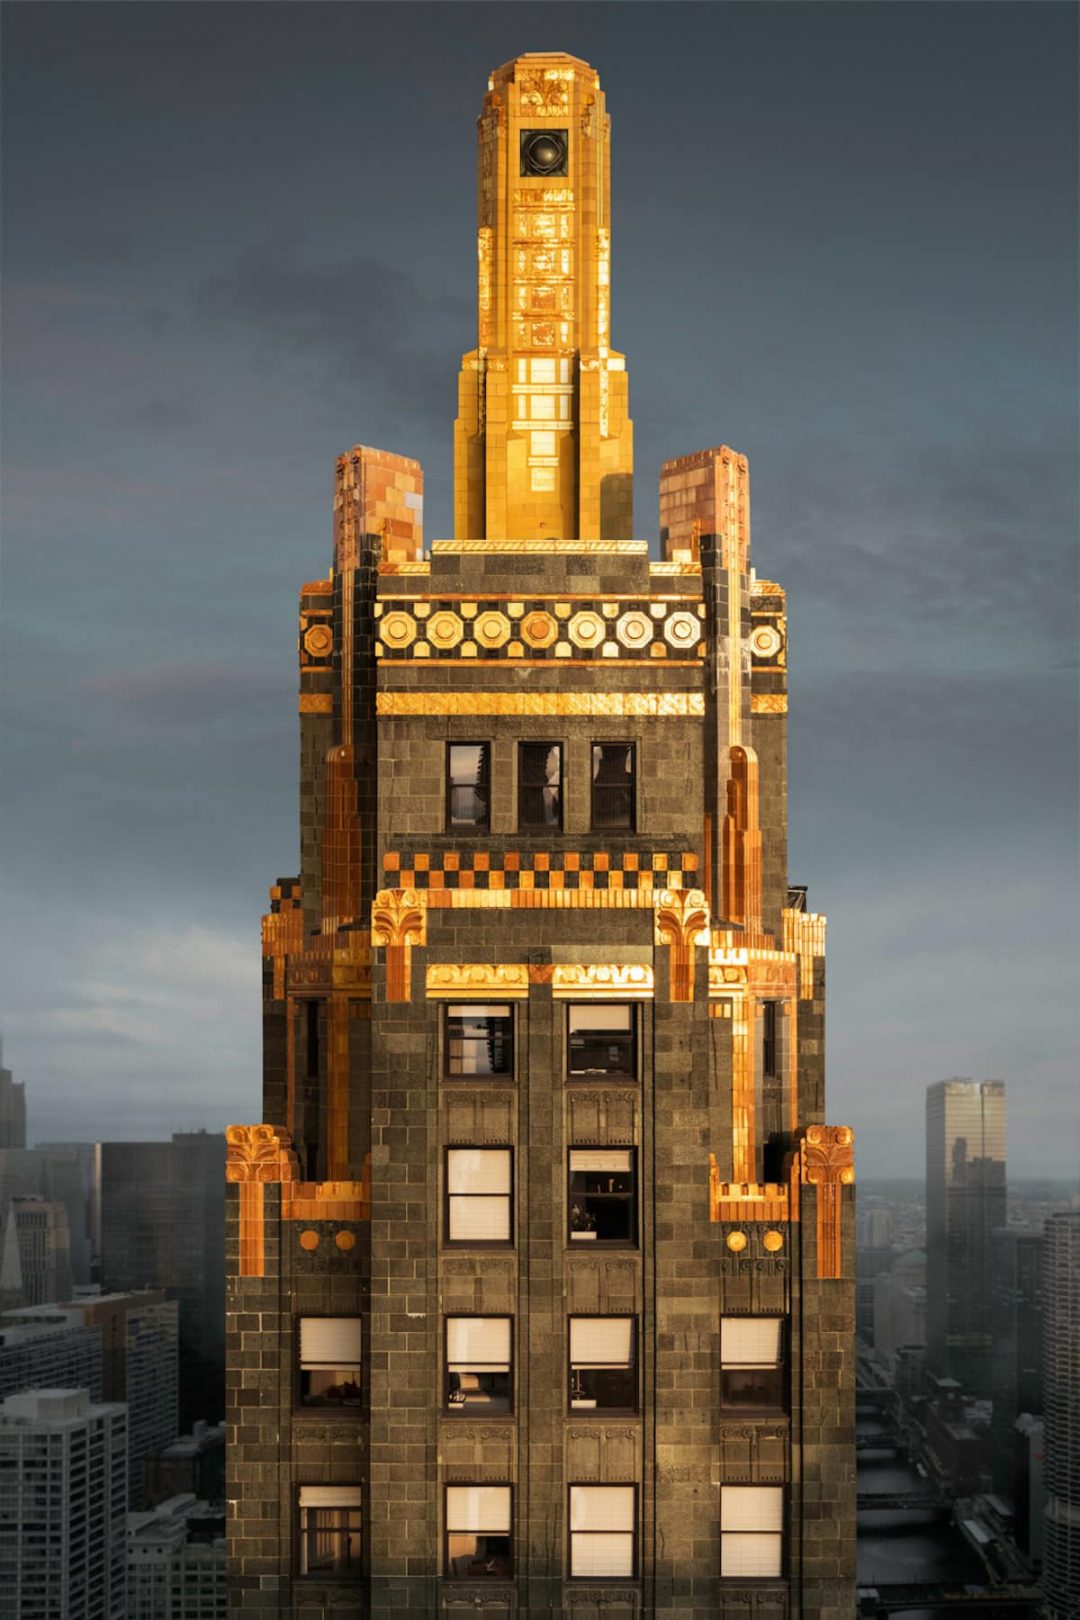 Carbide and Carbon Building di Chicago